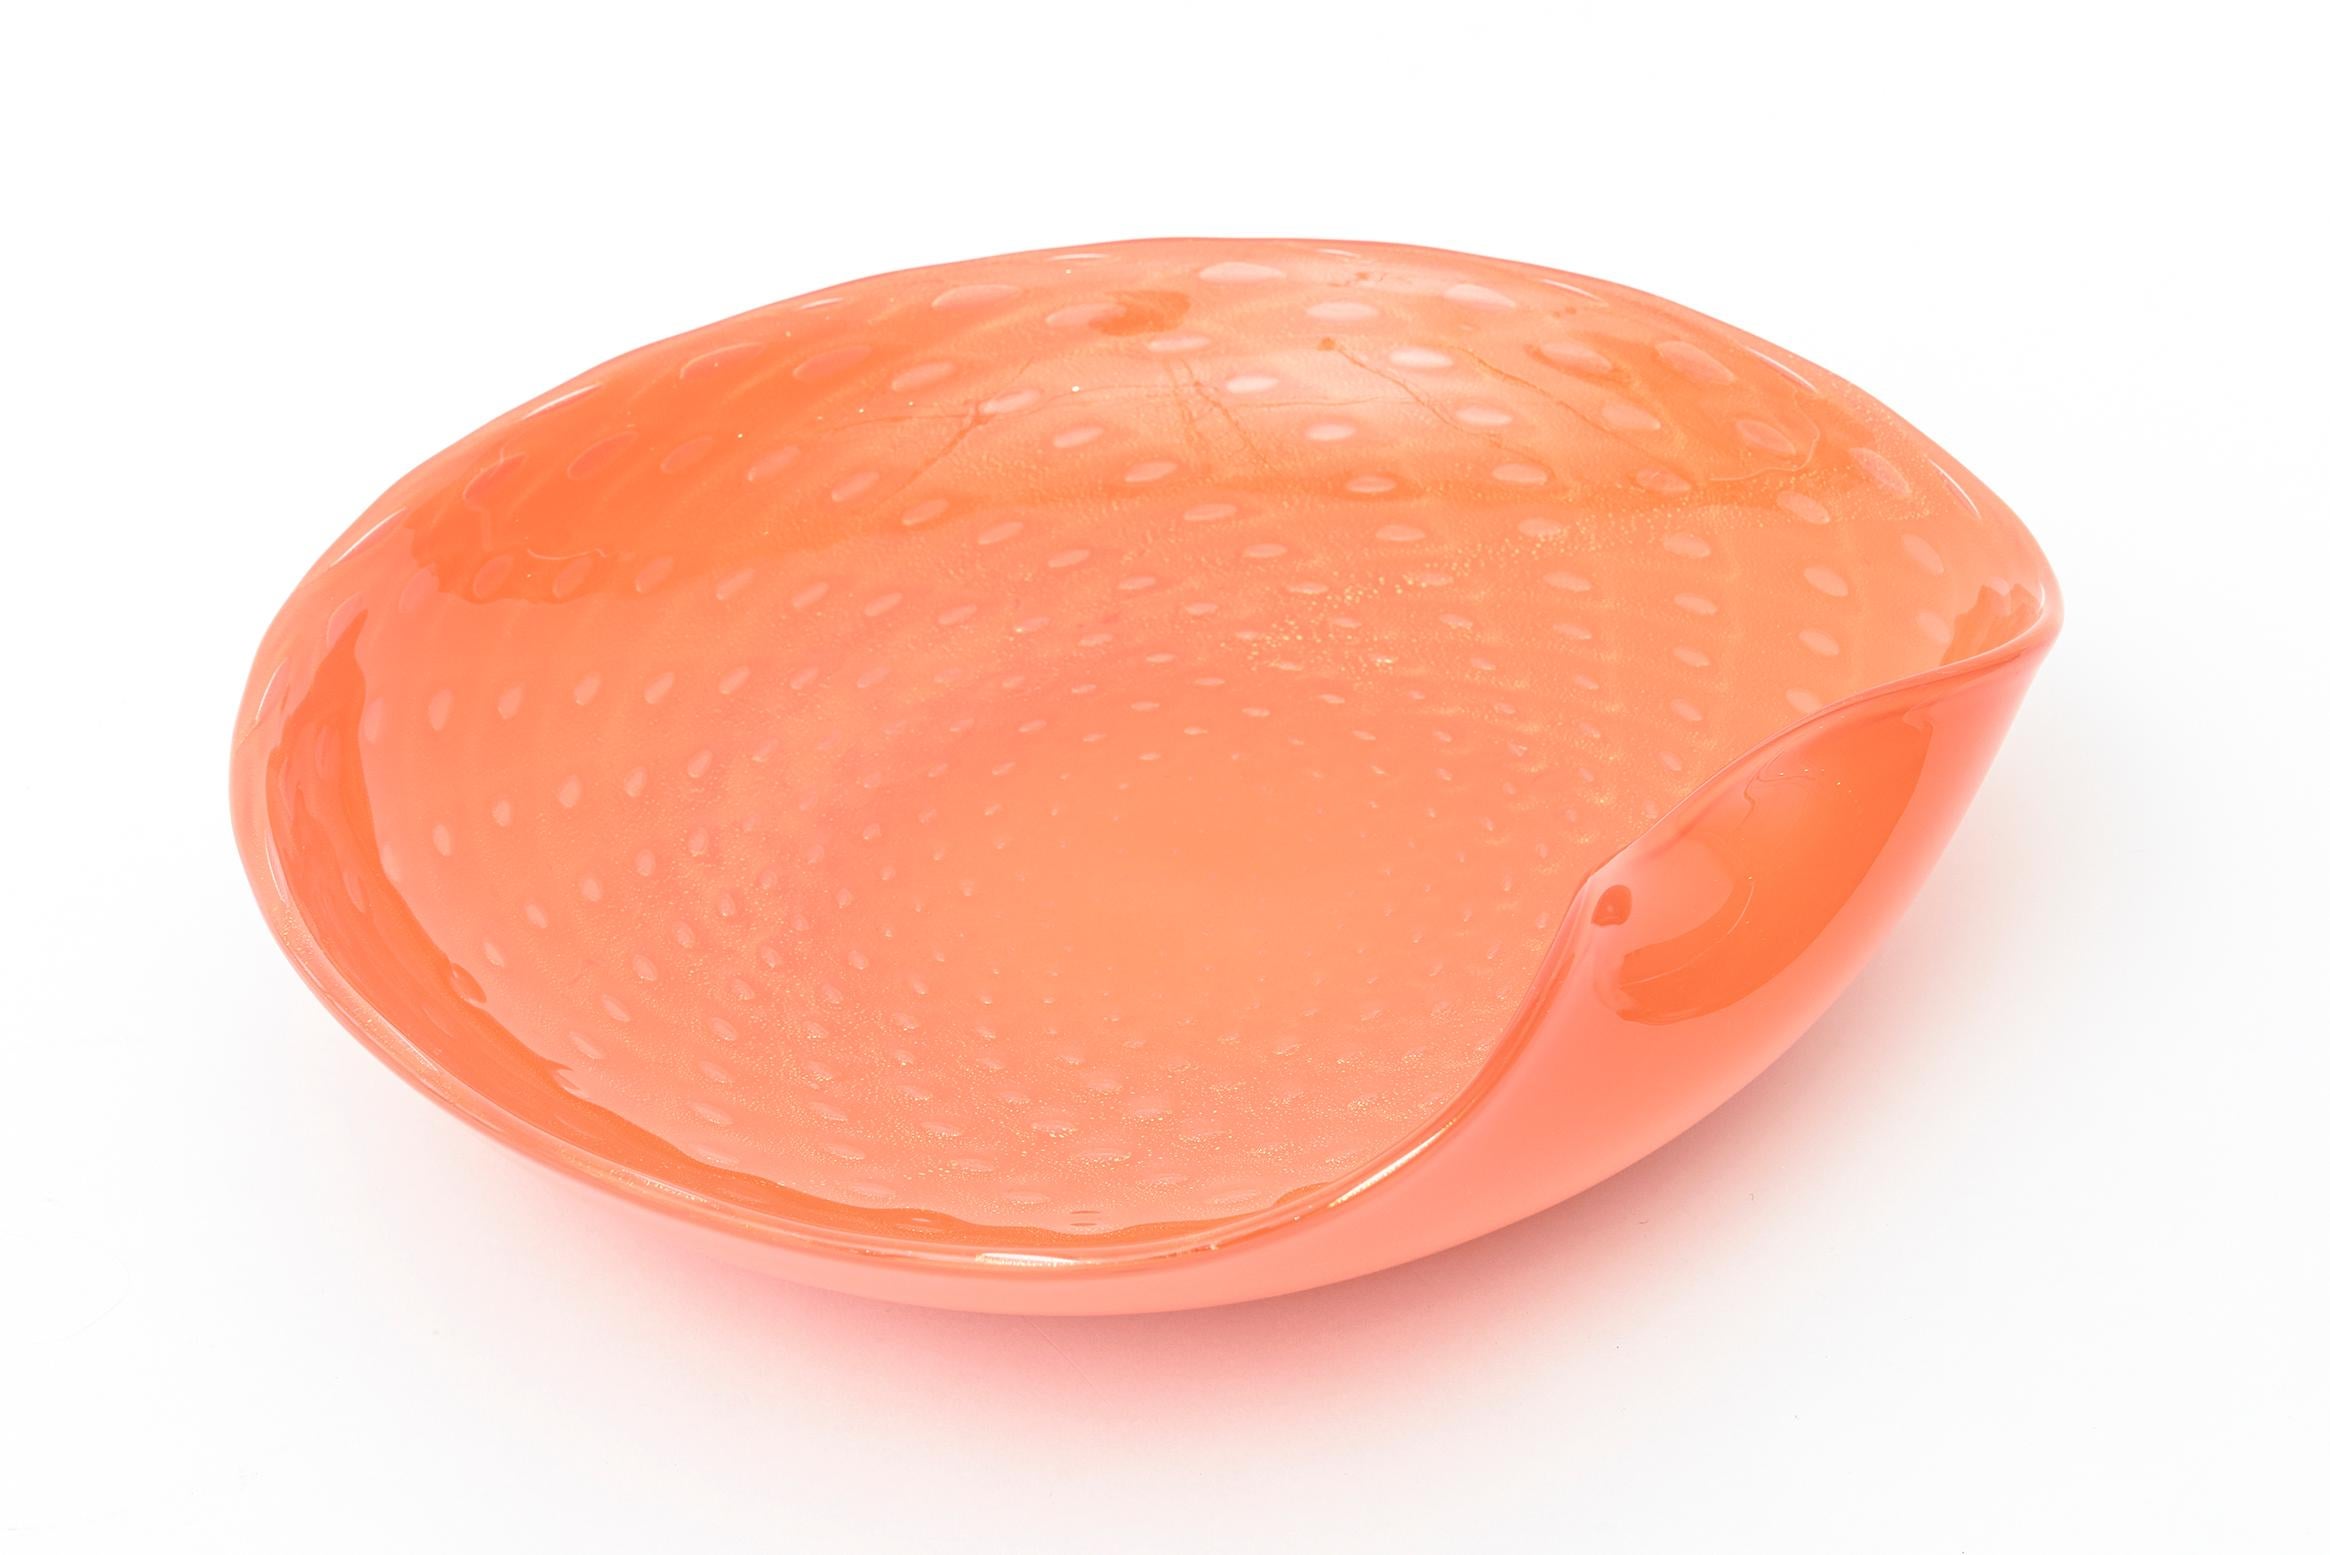 This lovely Italian Murano hand blown glass bowl with gold aventurine is by Barovier e Toso. It is vintage from the 1960s. This orange bowl is a beautiful luscious shade with abundance of almond shaped gold aventurine in the glass. Perfect for